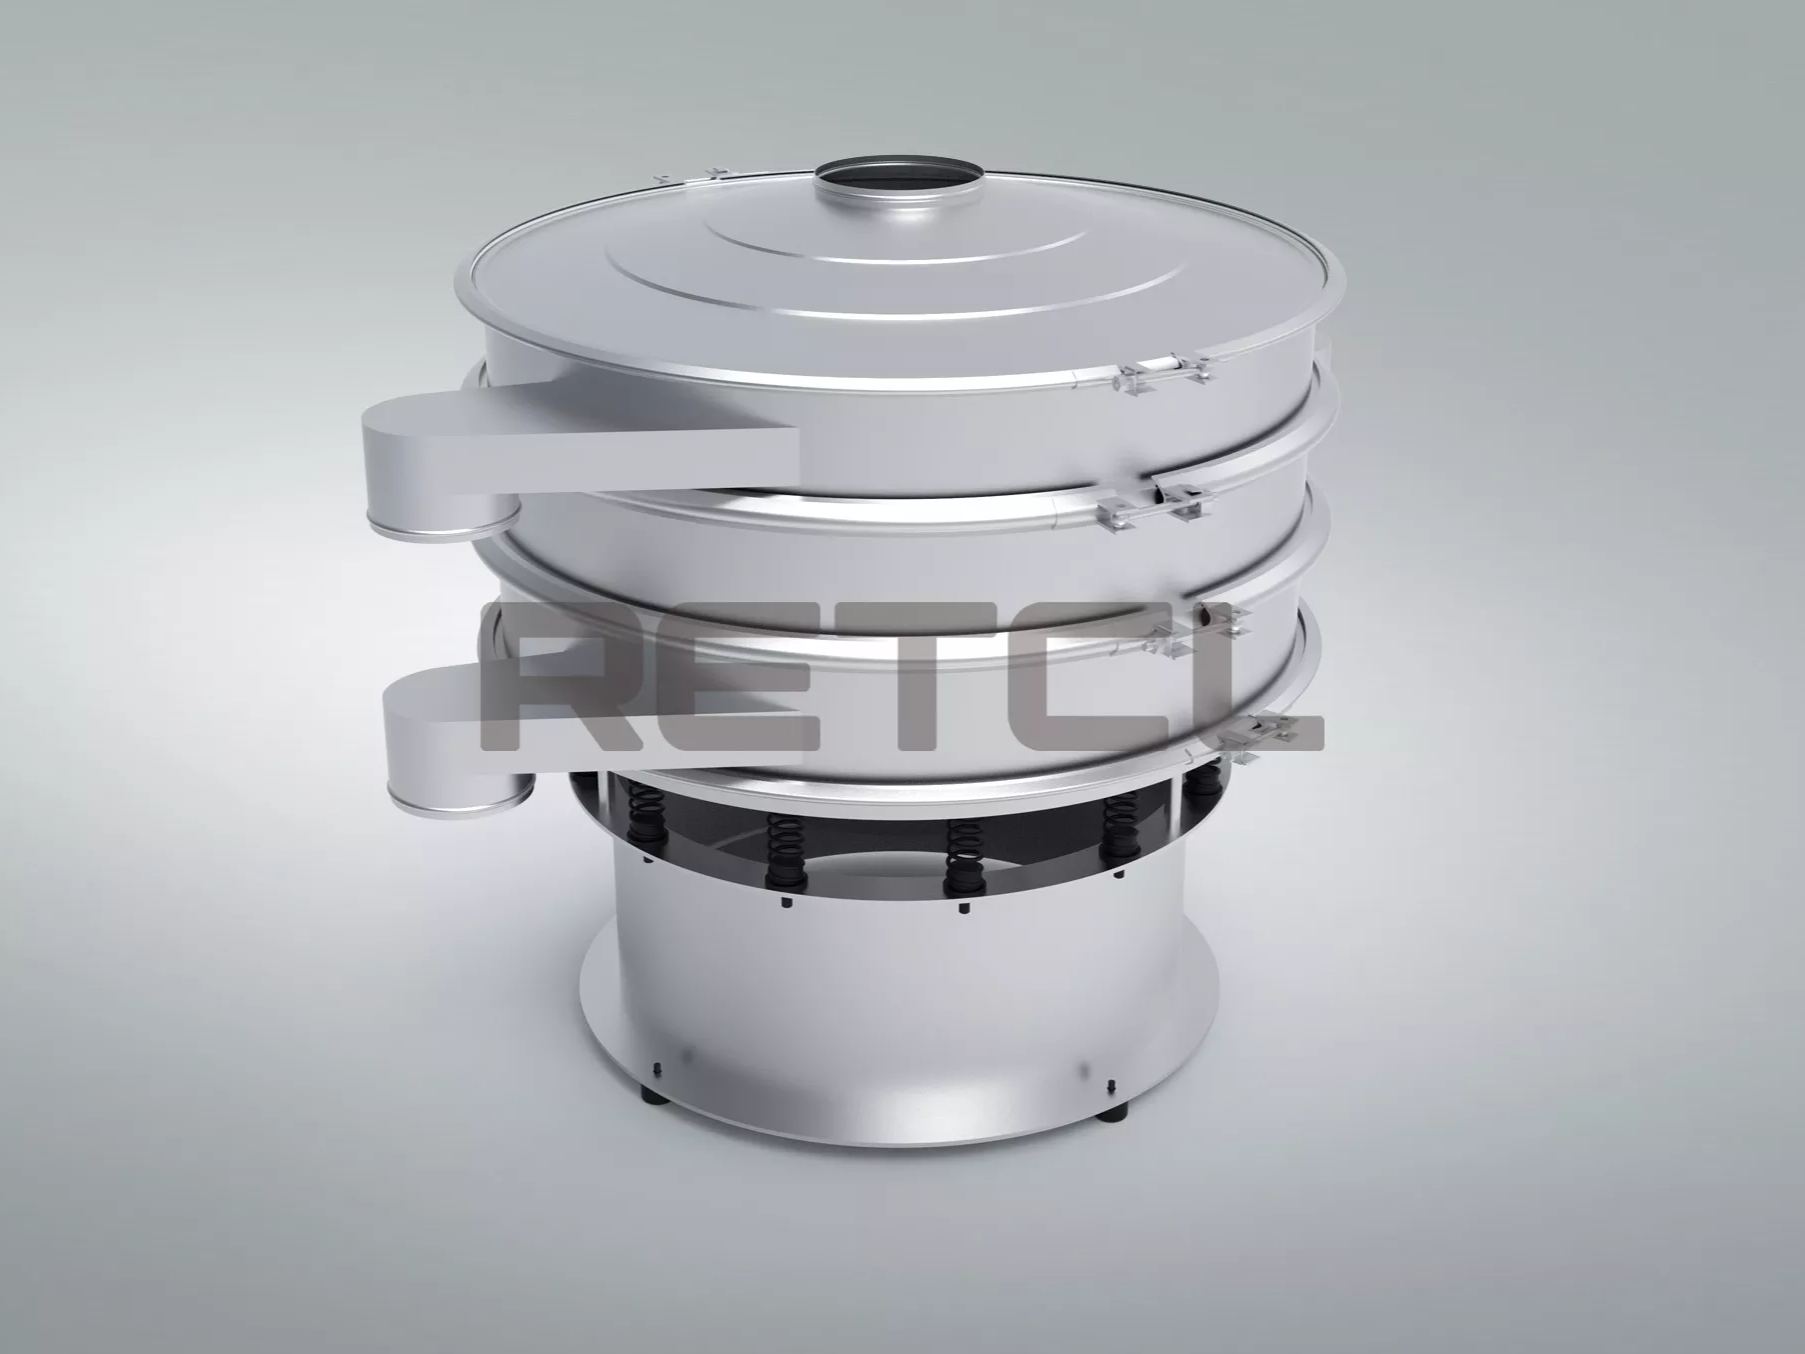 ZS-Round Vibrating Sifter-RETCL